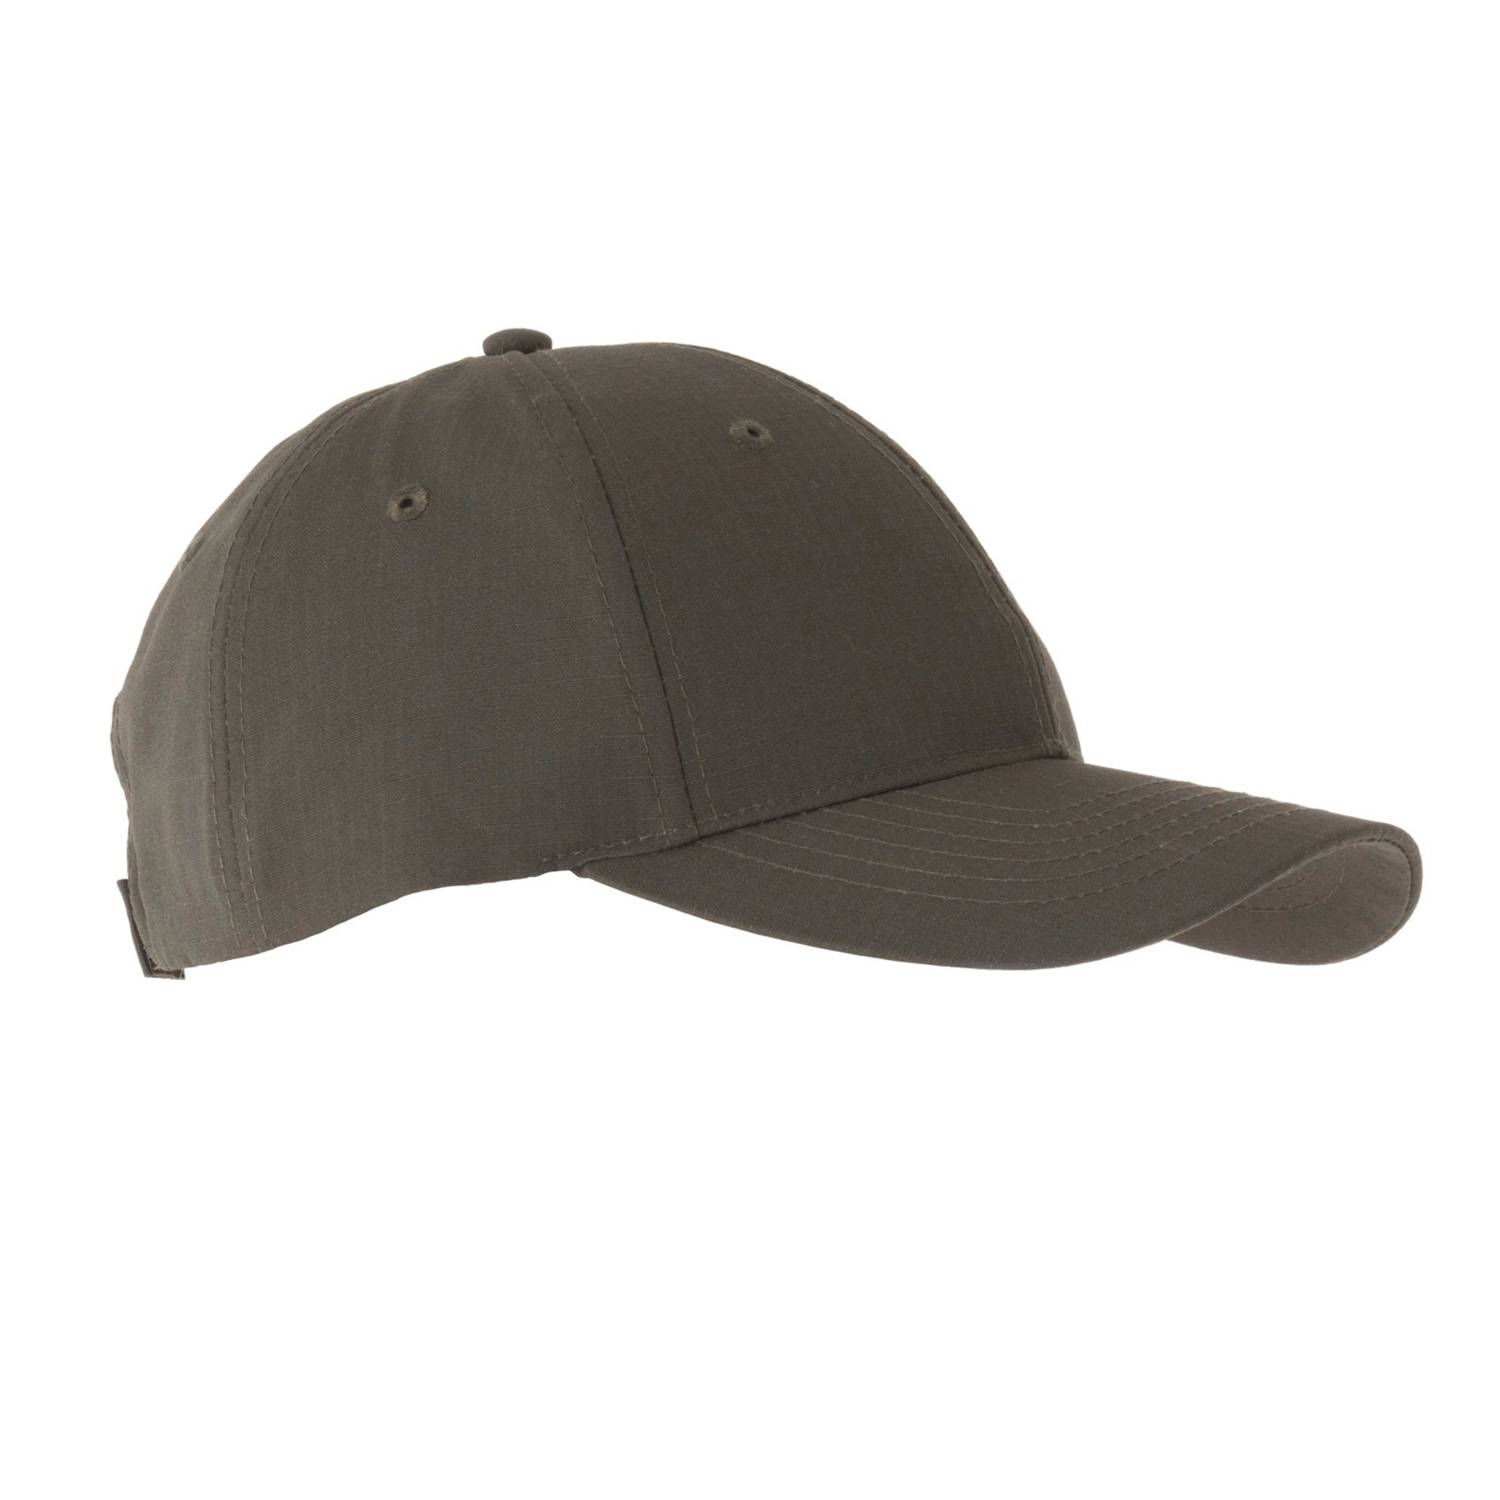 FIRST TACTICAL ADJUSTABLE BLANK HAT